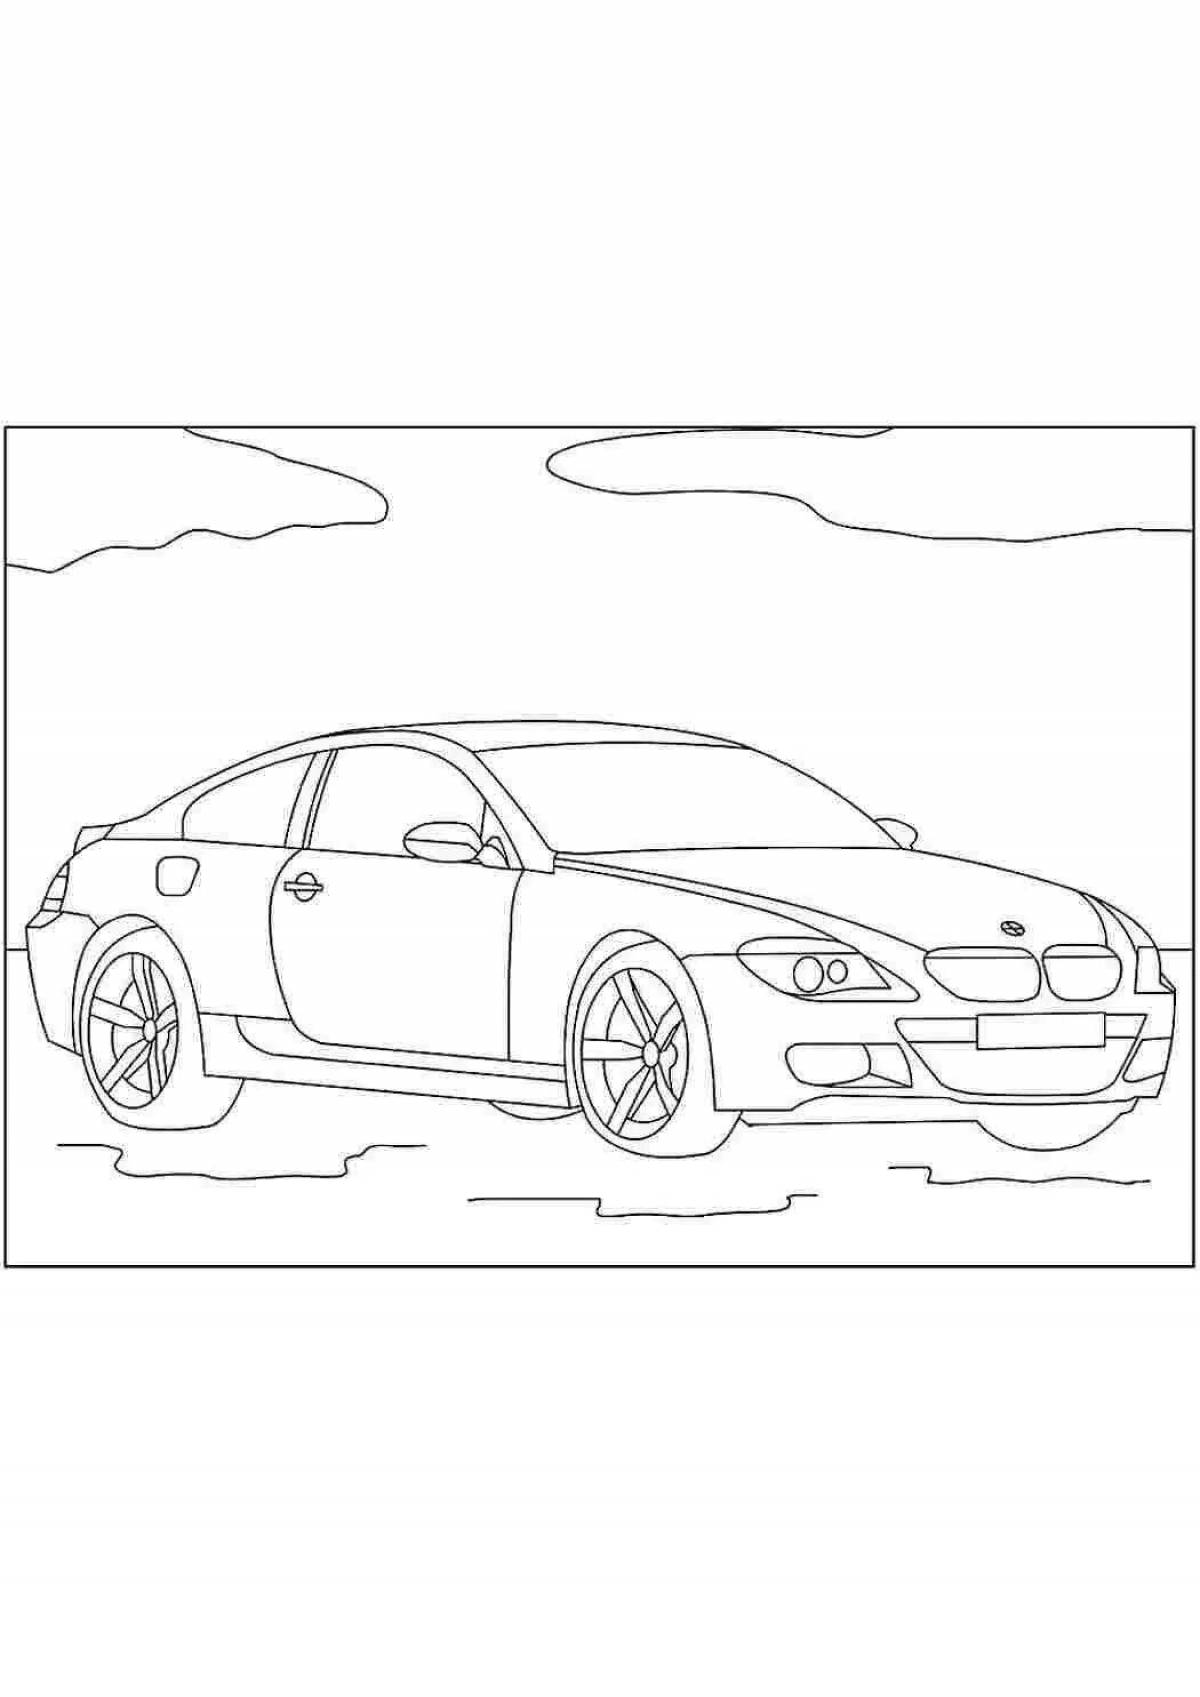 Outstanding beha coloring page